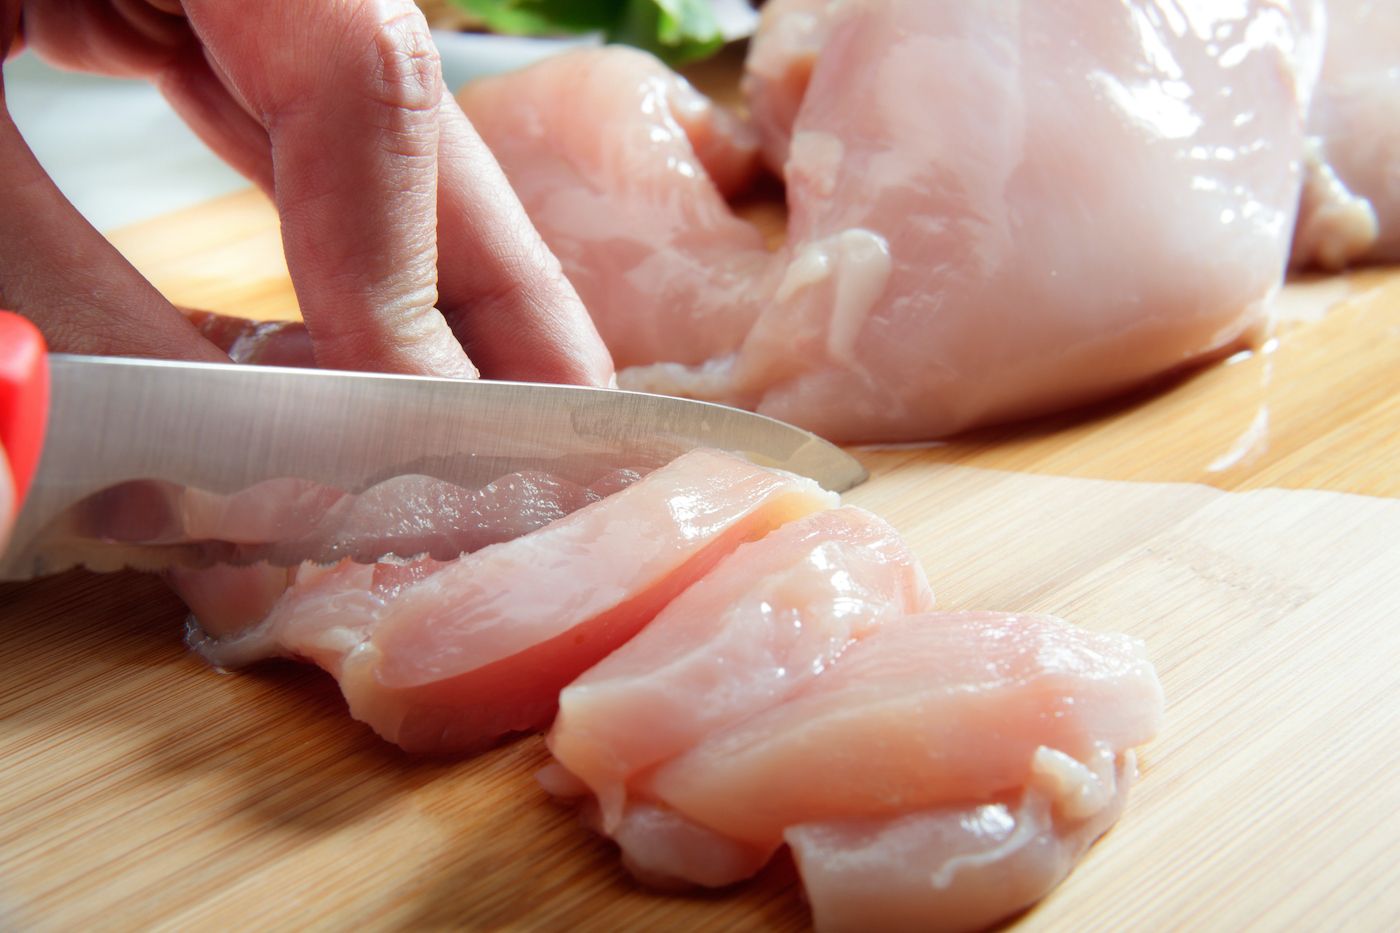 Salmonella is commonly found growing on raw chicken.